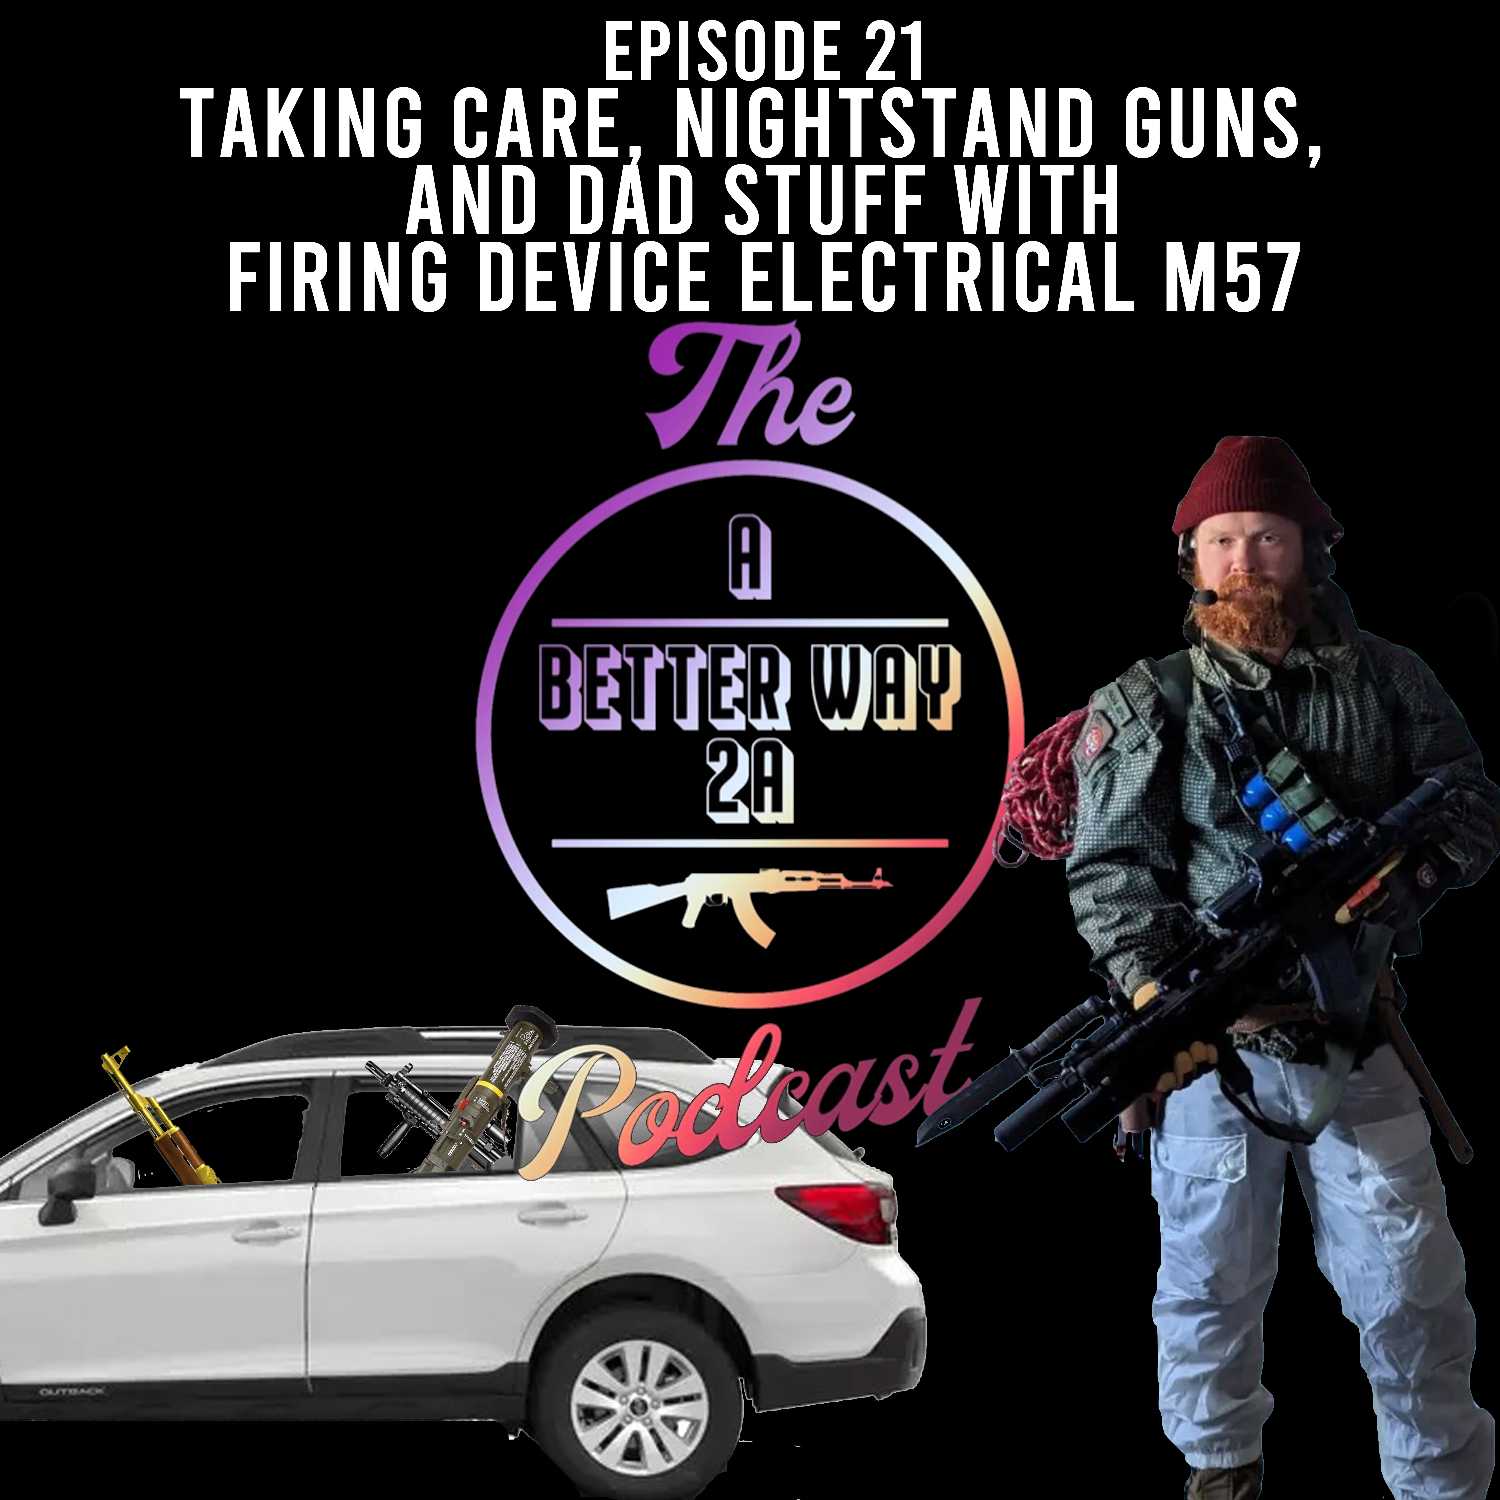 Episode 21 - Taking Care, Nightstand Guns, and Dad Stuff with Firing Device Electrical M57